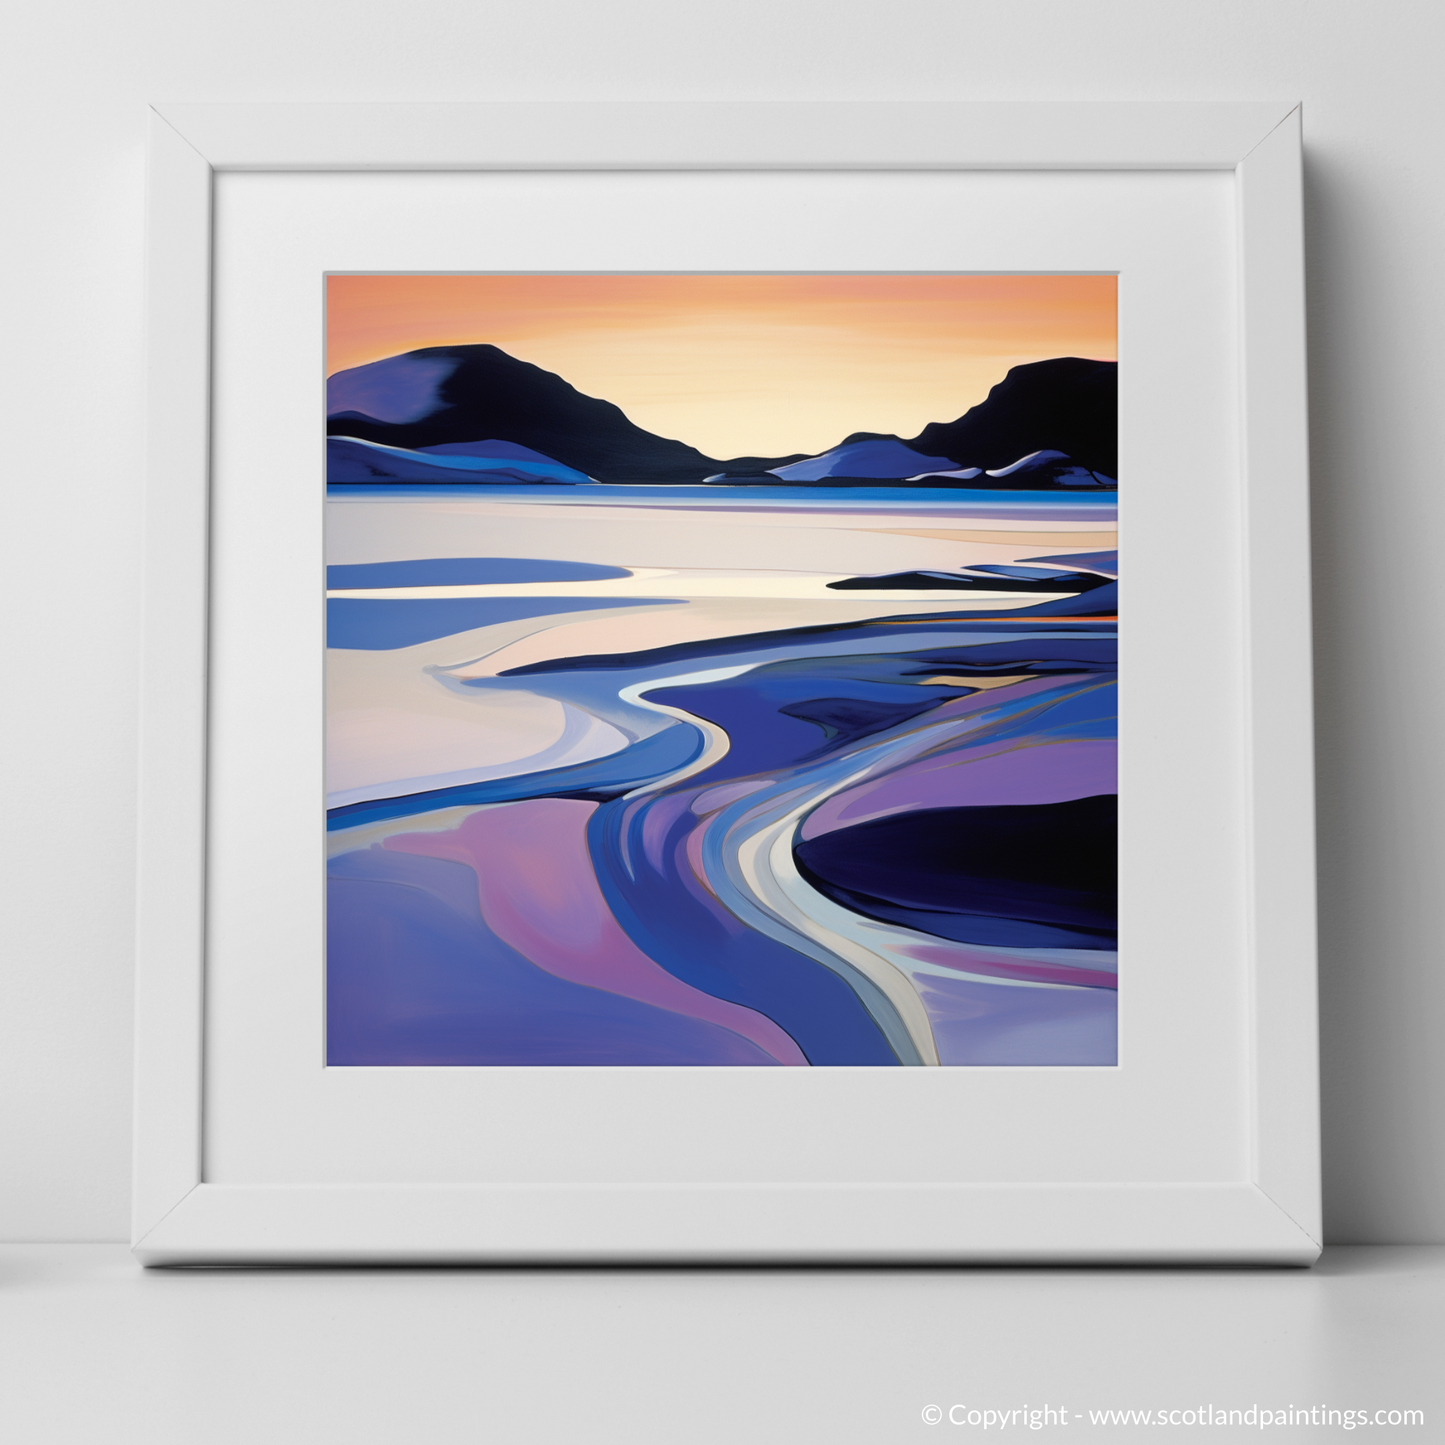 Dusk at Achmelvich Bay: A Color Field Homage